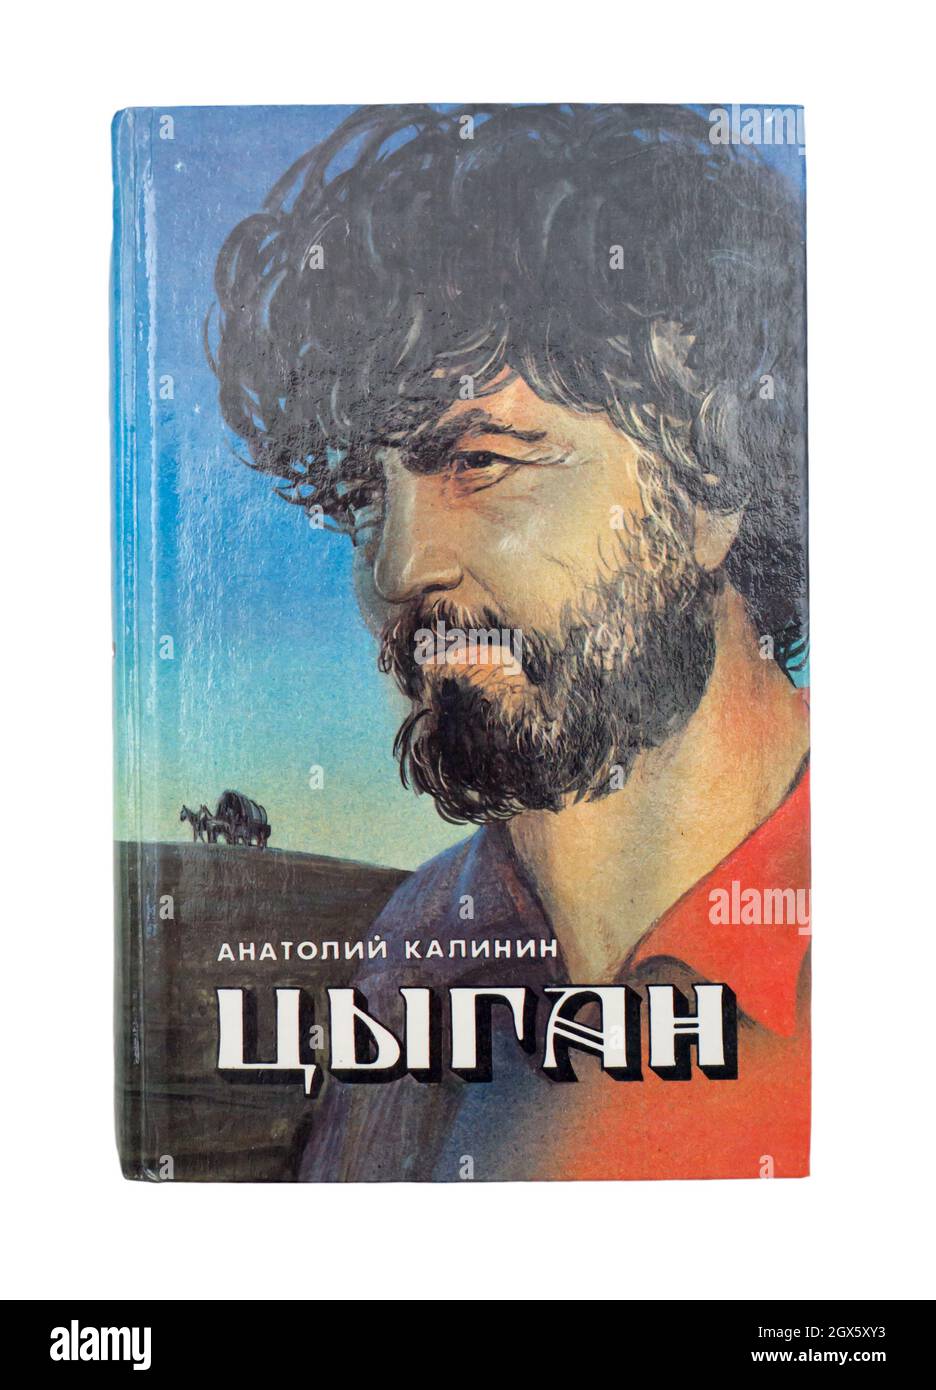 The 'Gypsy' of Anatoly Kalinin, first published in 1992 in USSR. Stock Photo